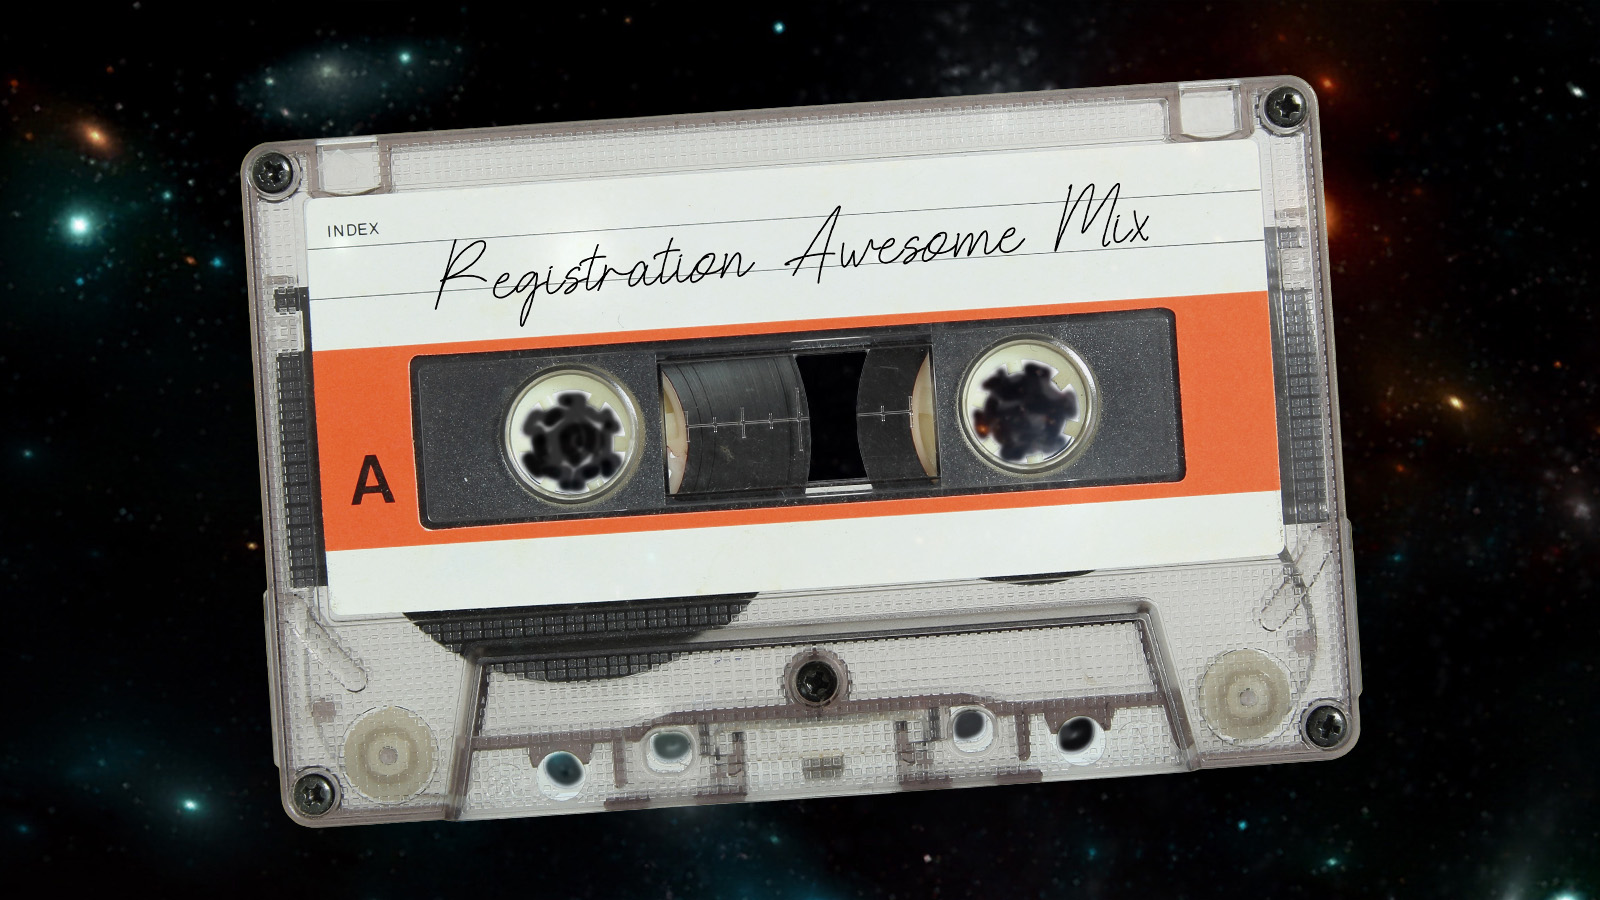 Cassette with "Registration Awesome Mix" written on it